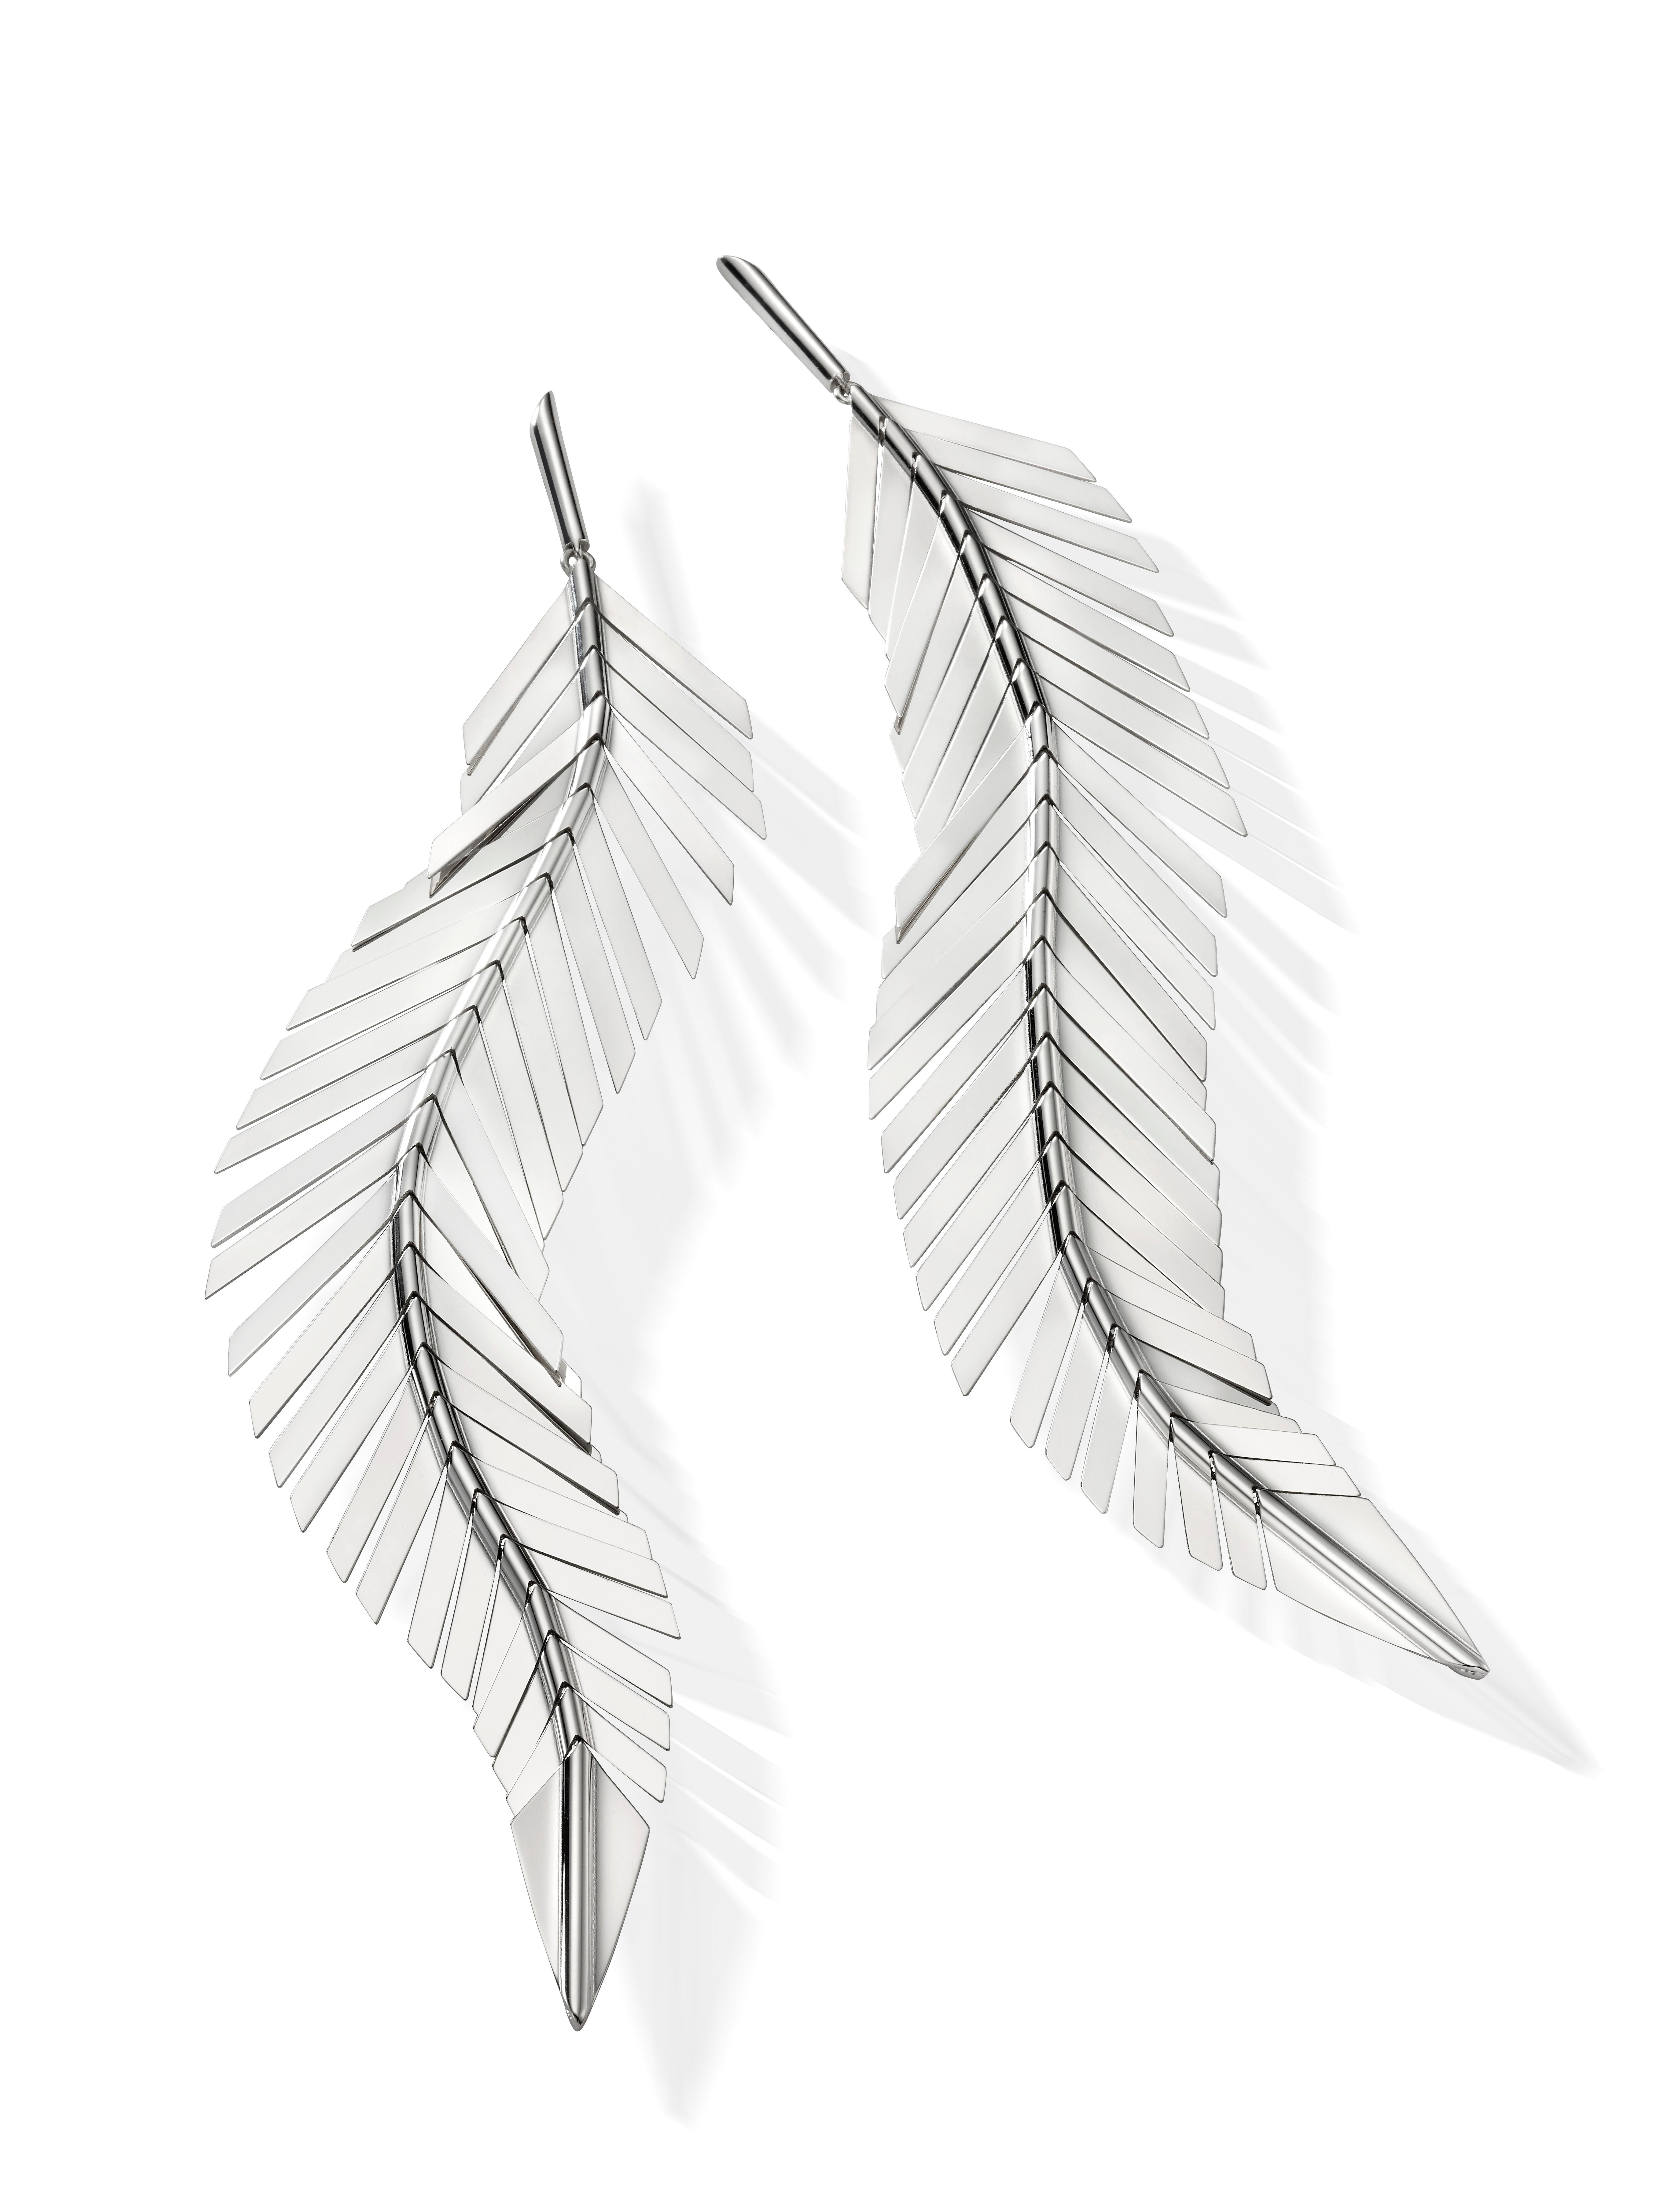 Take flight. These dramatic statement earrings flutter with each movement and beautifully elongate the neck. Handcrafted in 18k high polished gold. The Second Skin: Feather earrings are meticulously handcrafted to replicate the delicate movement and